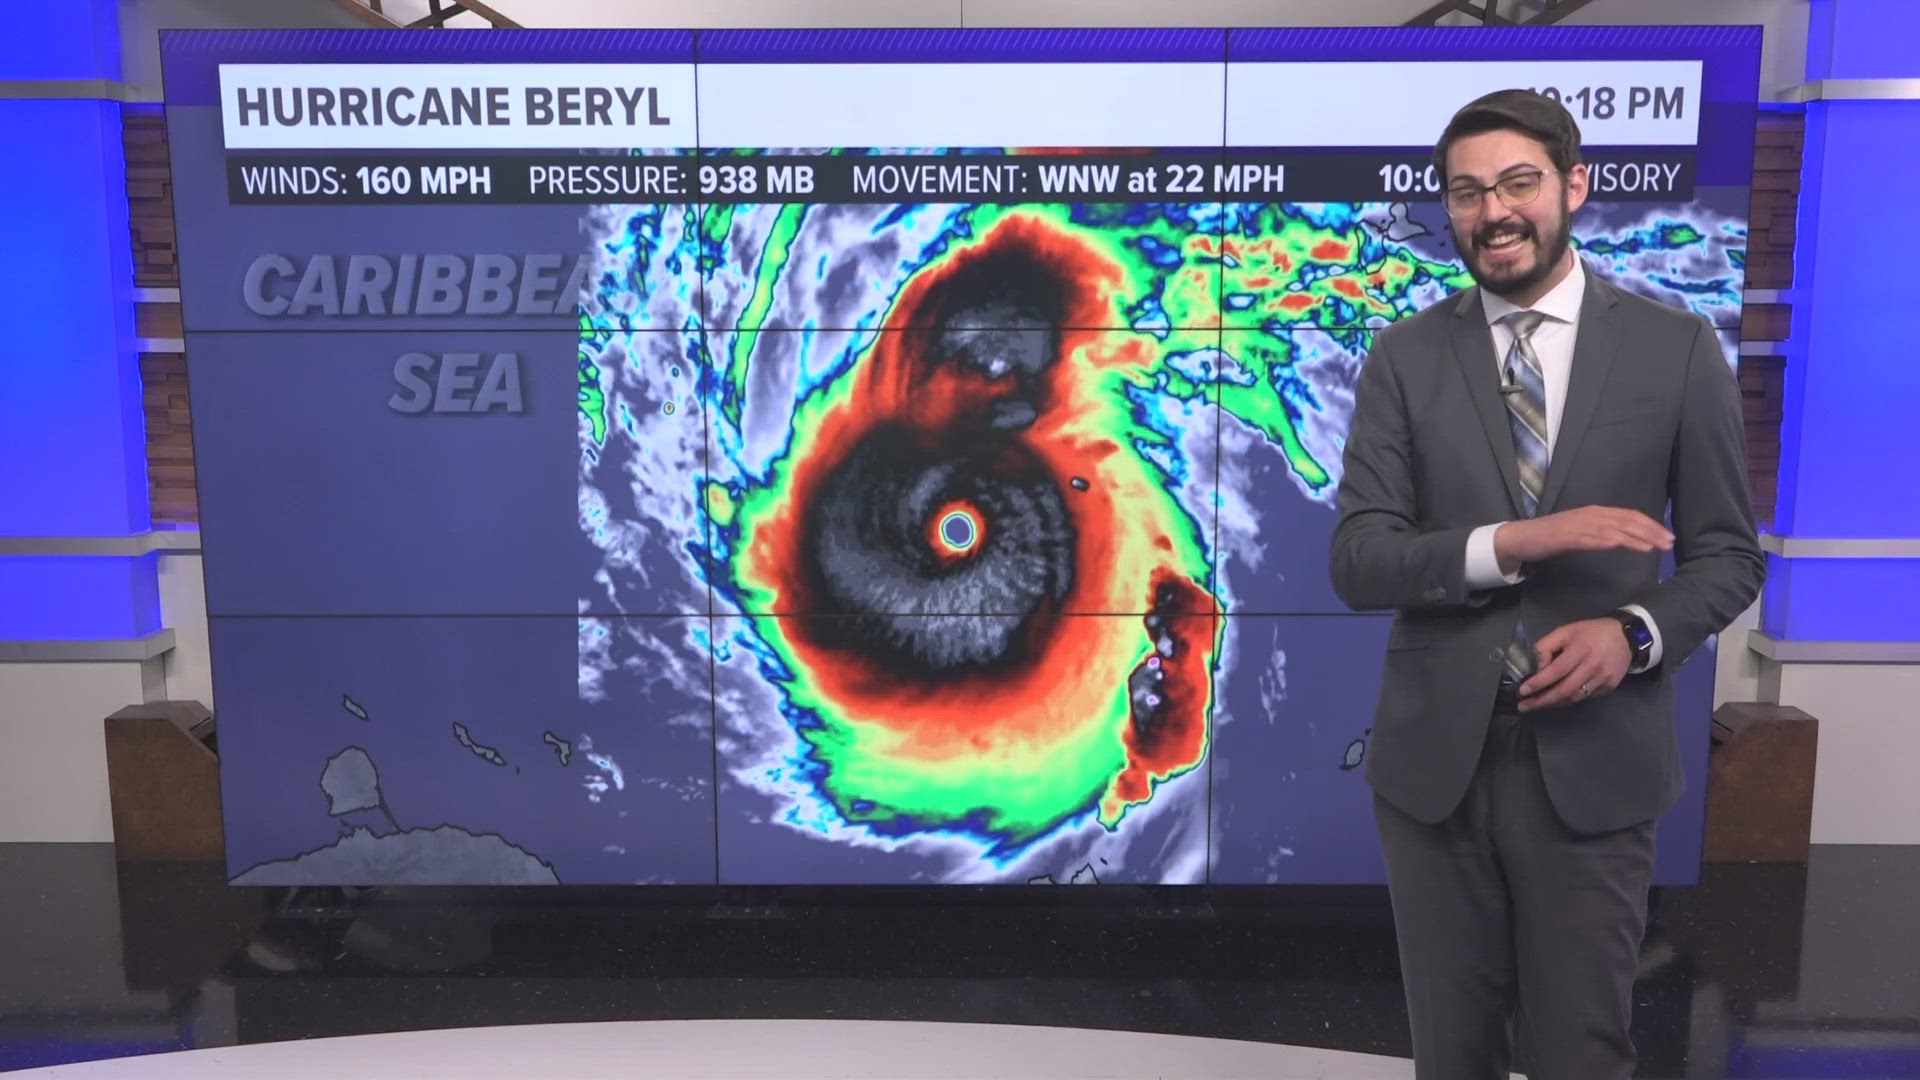 After a series of shattered records, Beryl now becomes the earliest Category 5 hurricane by more than two weeks. It is expected to weaken later this week.